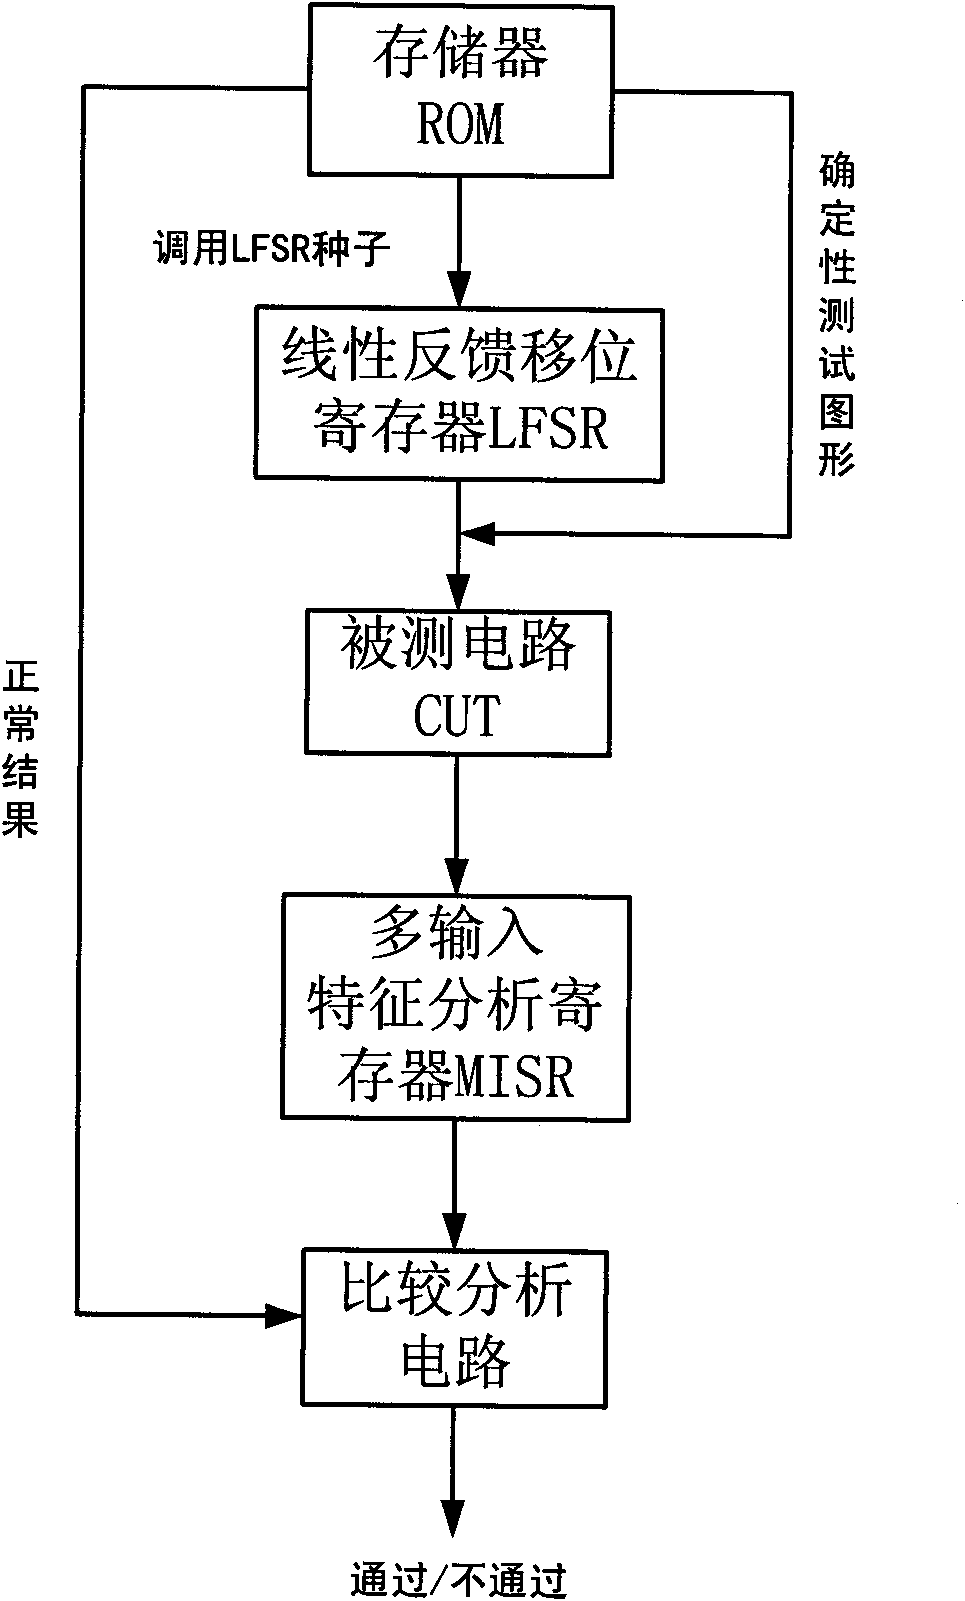 Built-in self-testing system and method thereof with mixed mode